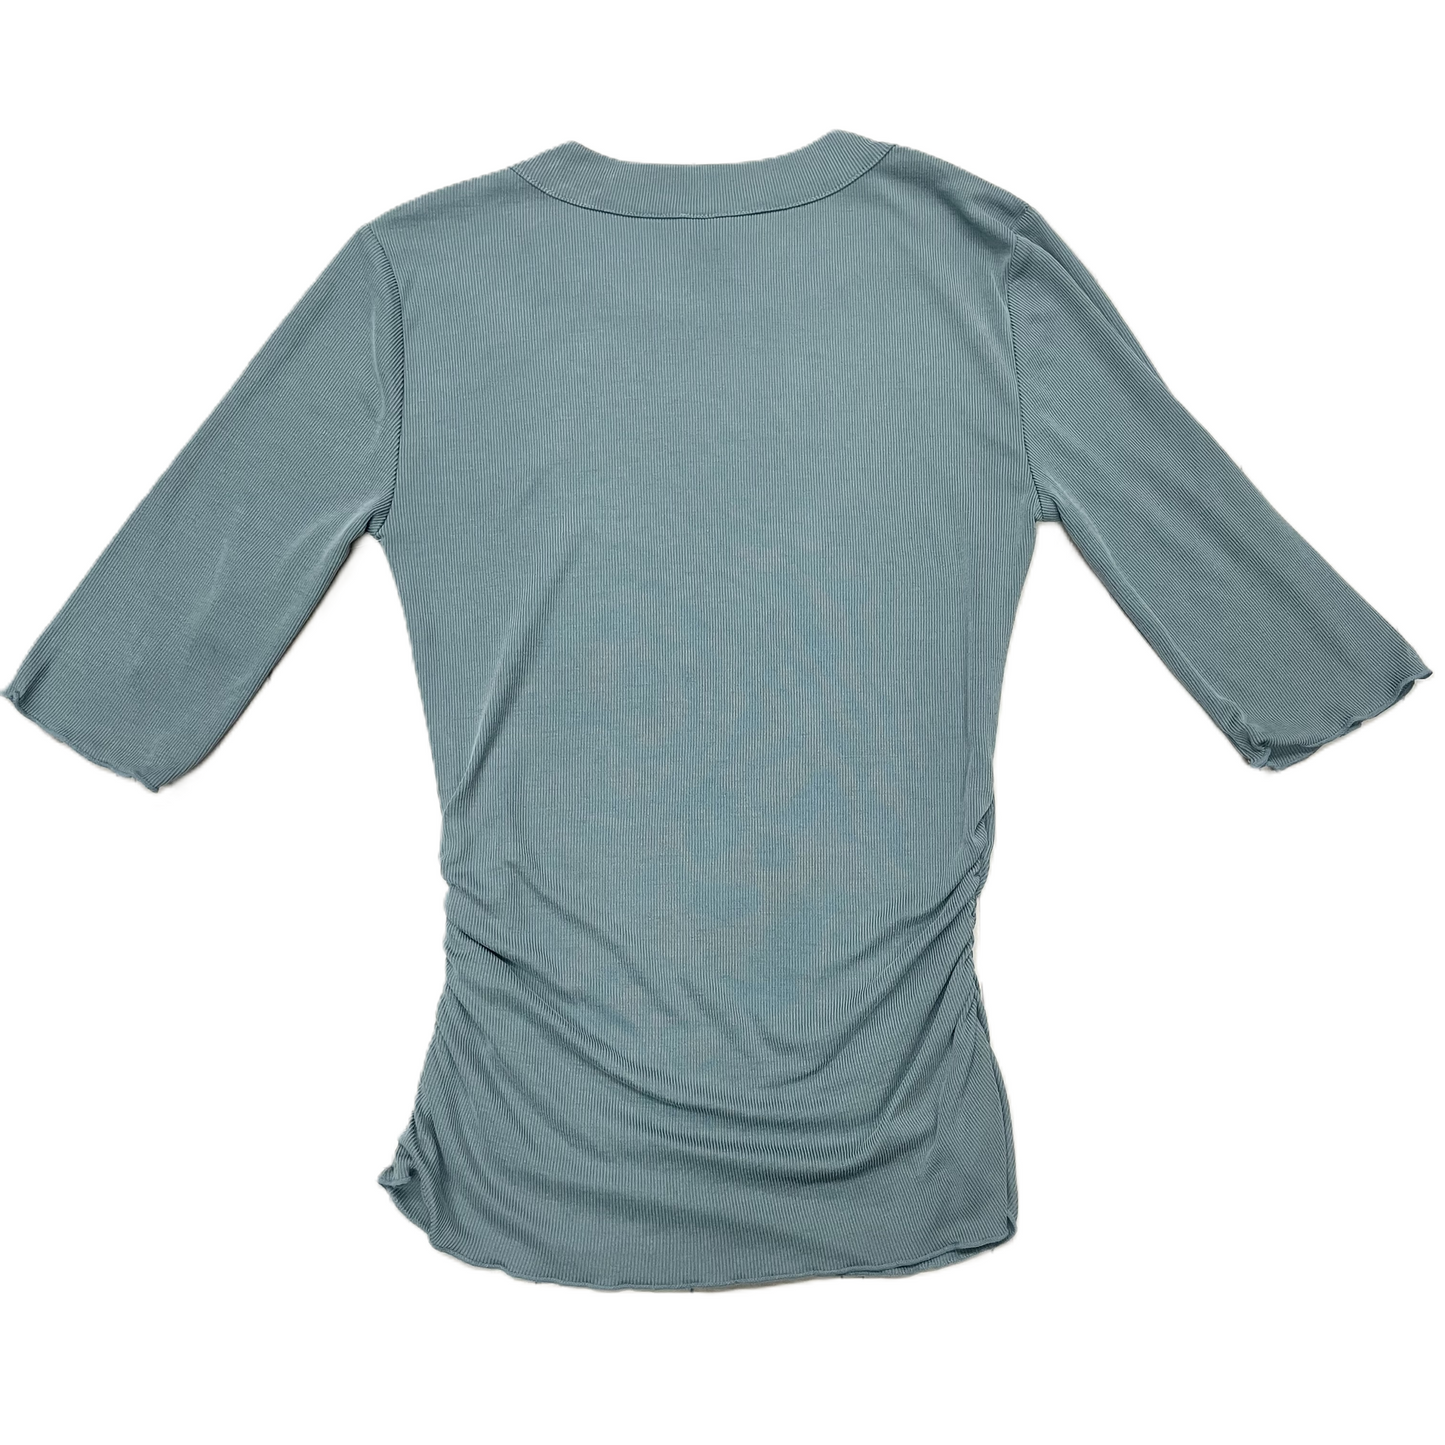 Teal Top 3/4 Sleeve By Free People, Size: Xs